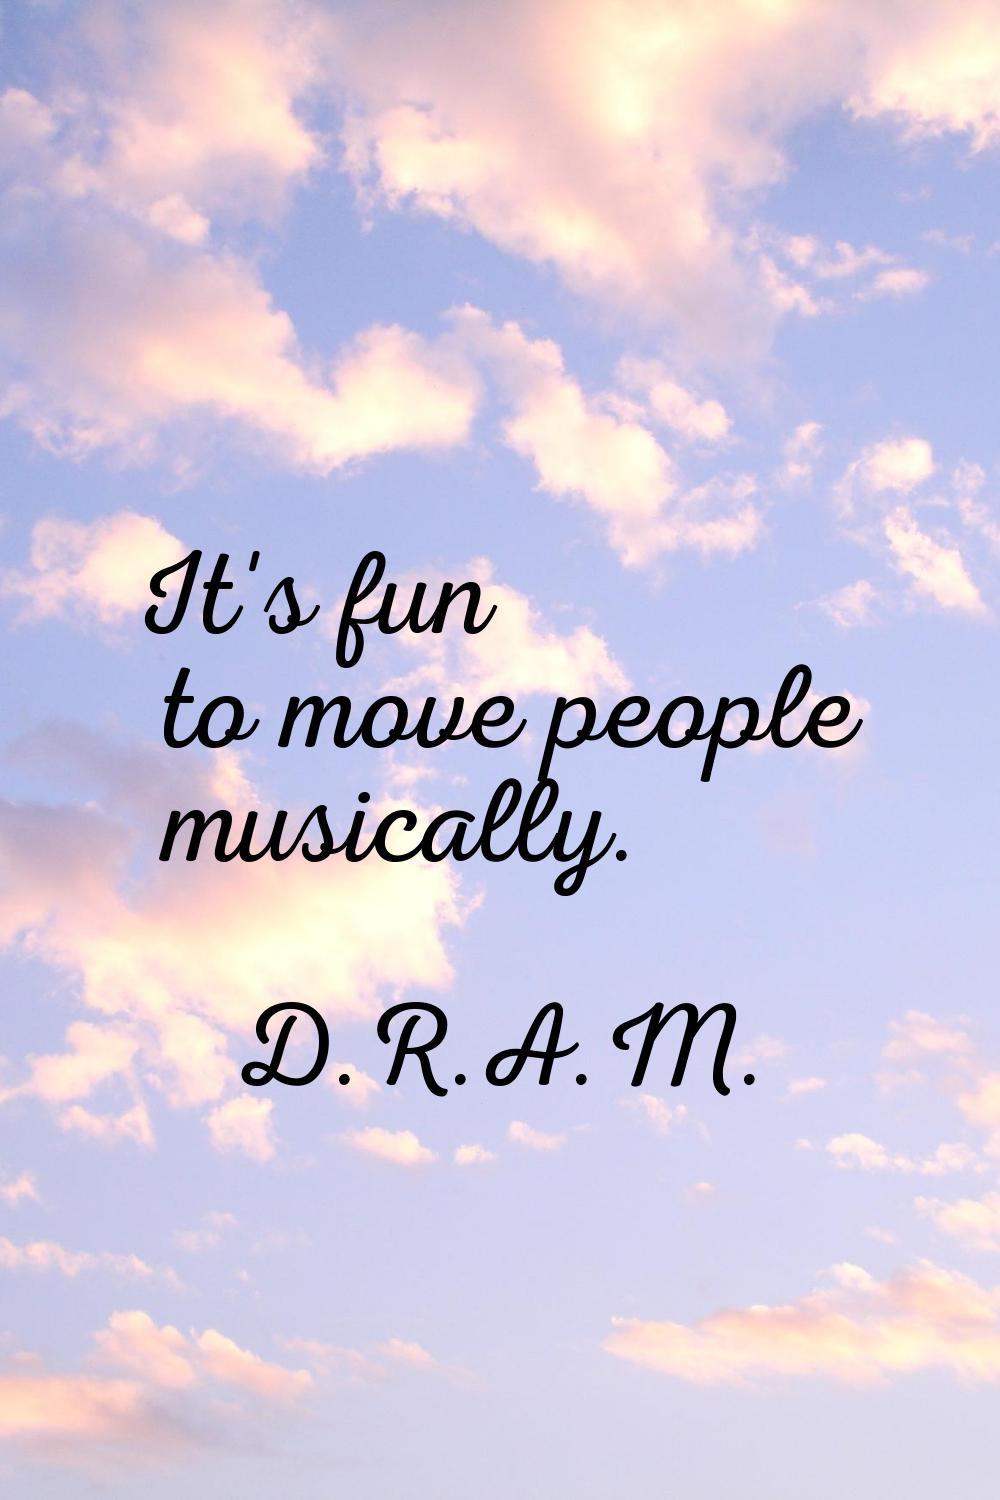 It's fun to move people musically.